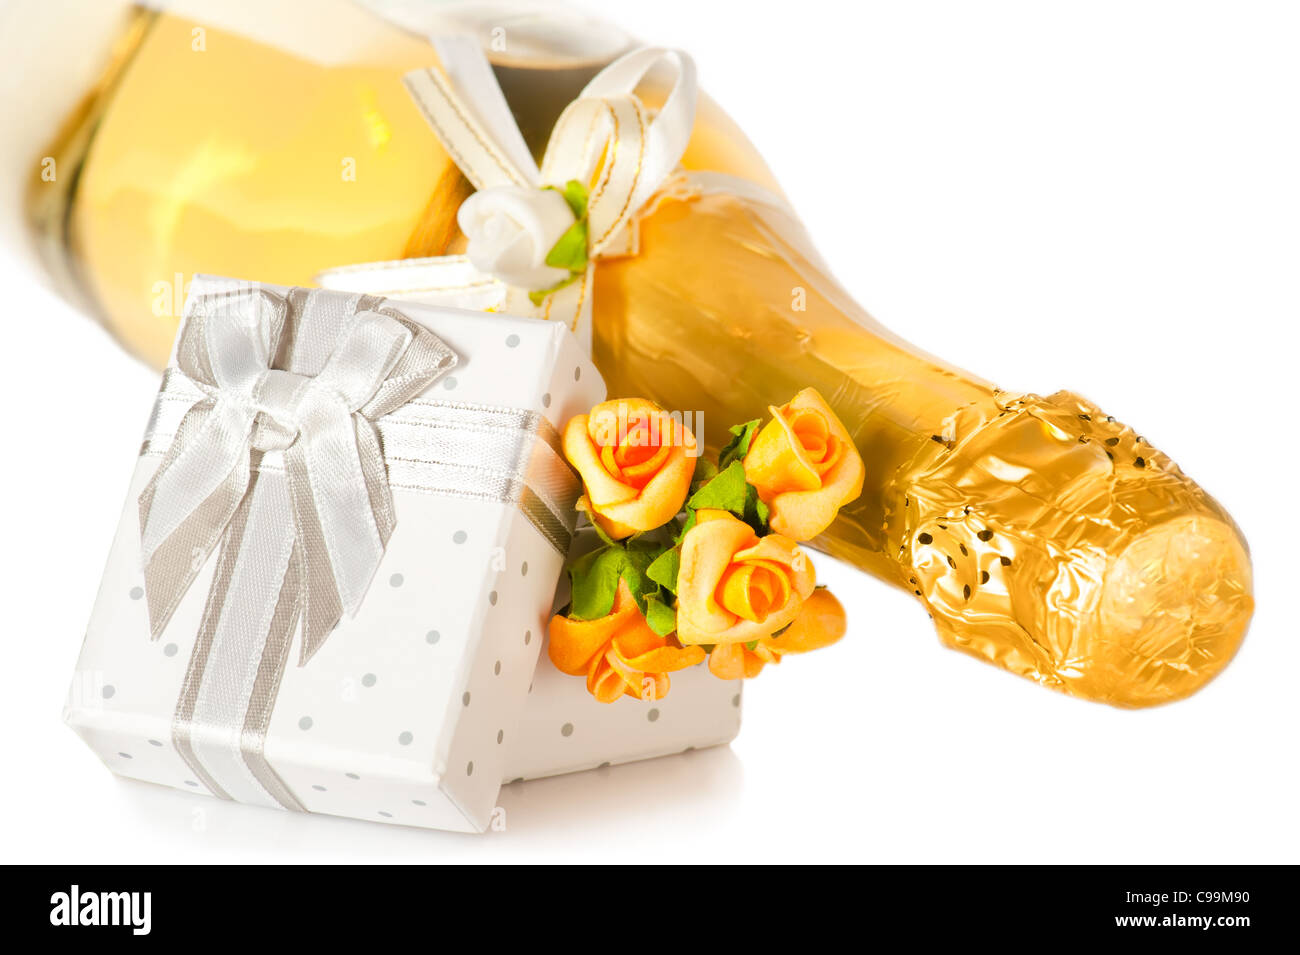 Champagne bottle, present box with bow and flower boutonniere on white background Stock Photo